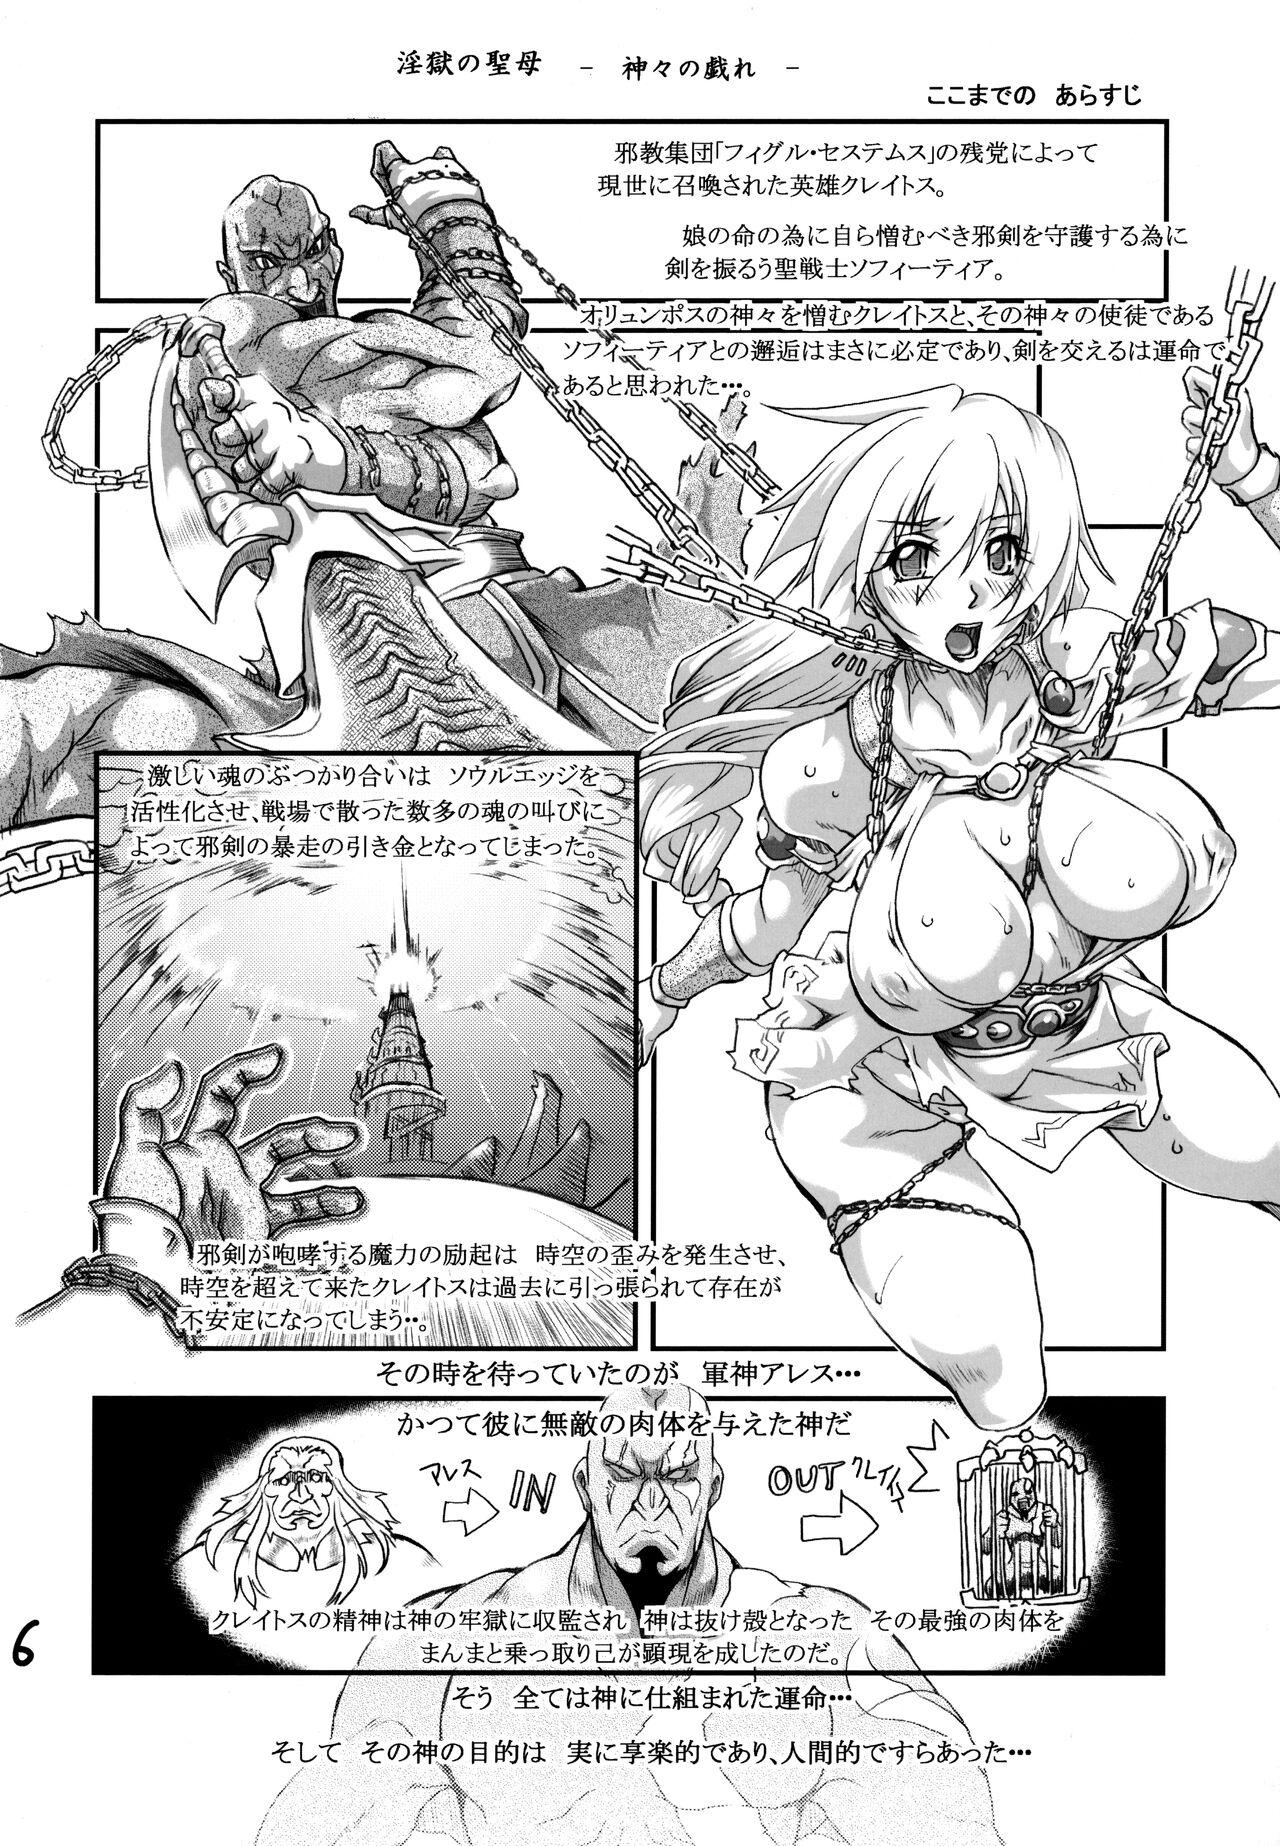 Indian 淫獄の聖母 神々の戯れ 追憶篇 - Soulcalibur Huge - Page 5